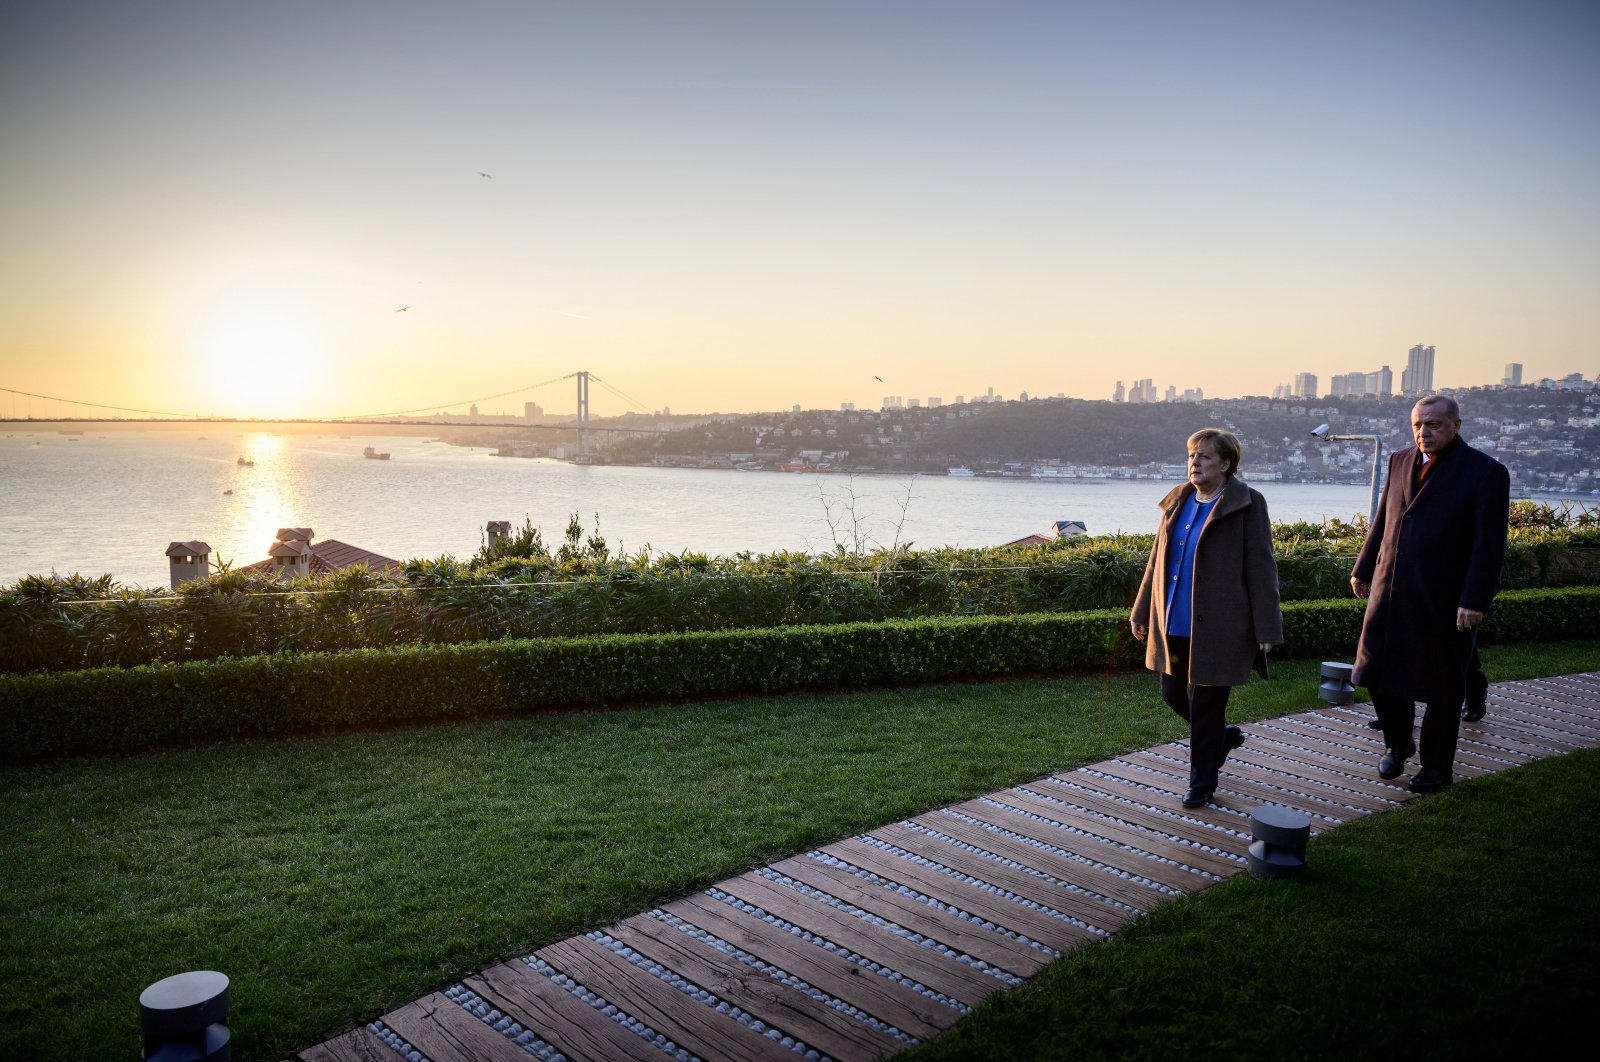 German Chancellor Angela Merkel (L) and President Recep Tayyip Erdoğan walking prior to their meeting on bilateral relations, Istanbul, Turkey, Jan. 24, 2021. (Photo by Getty Images)